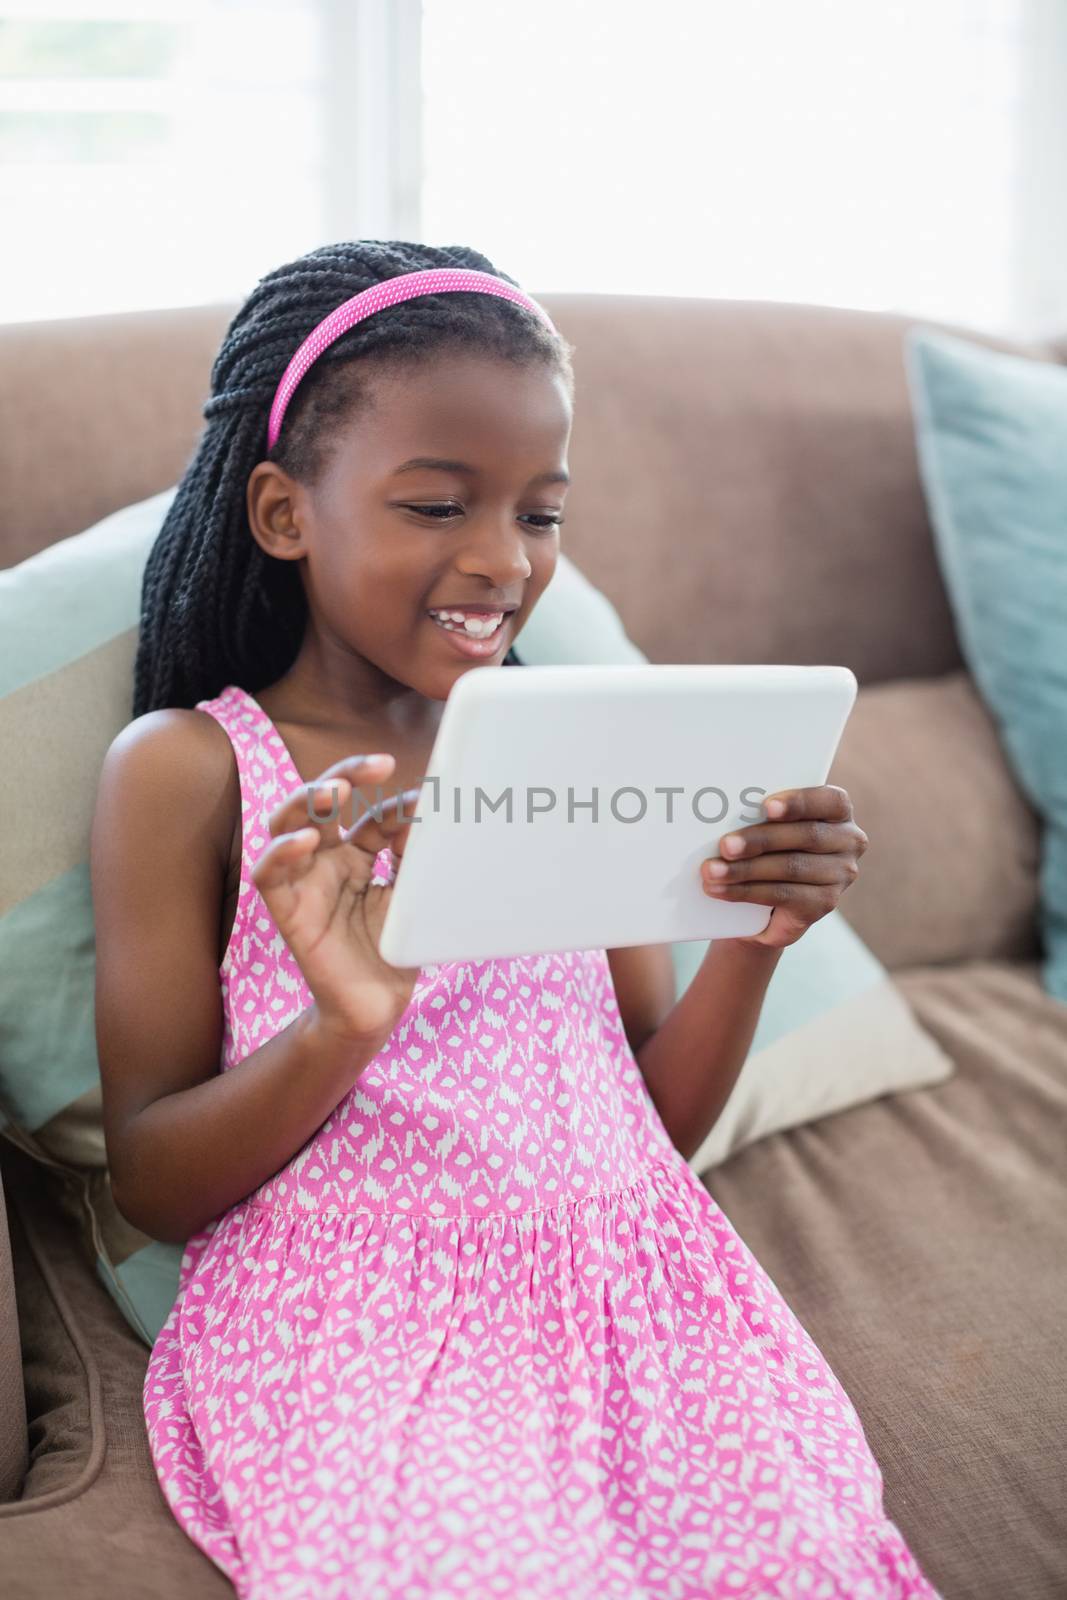 Girl sitting on sofa and using digital tablet in living room at home